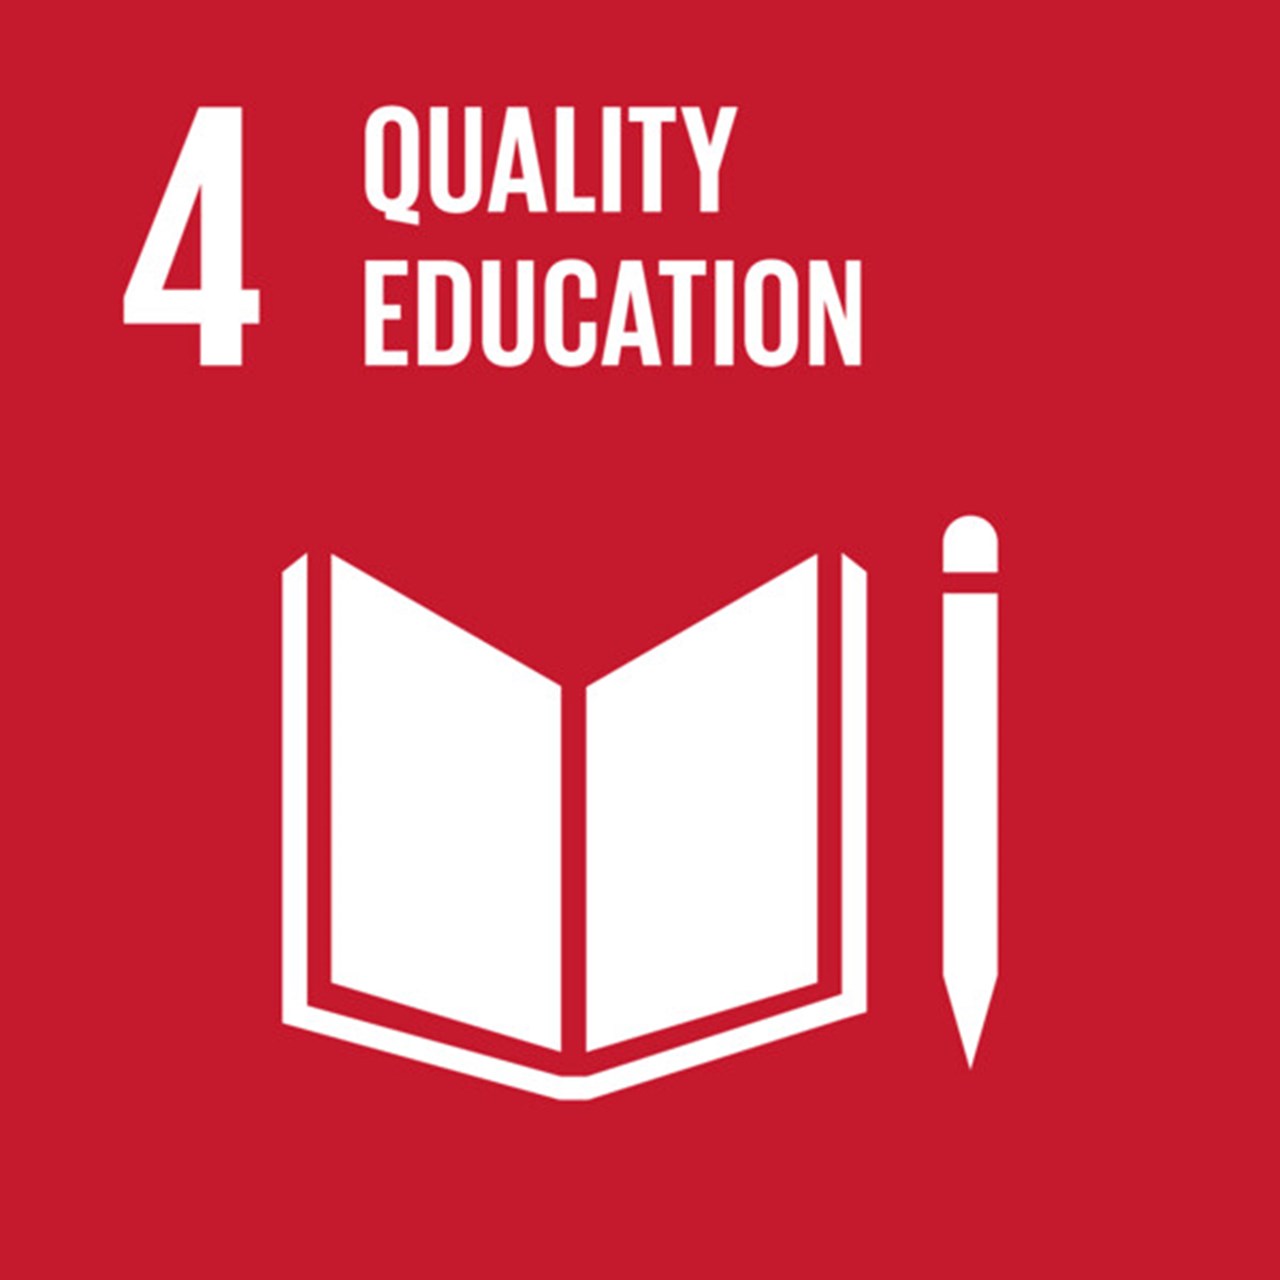 The Global Goals, Goal 4 - Quality Education